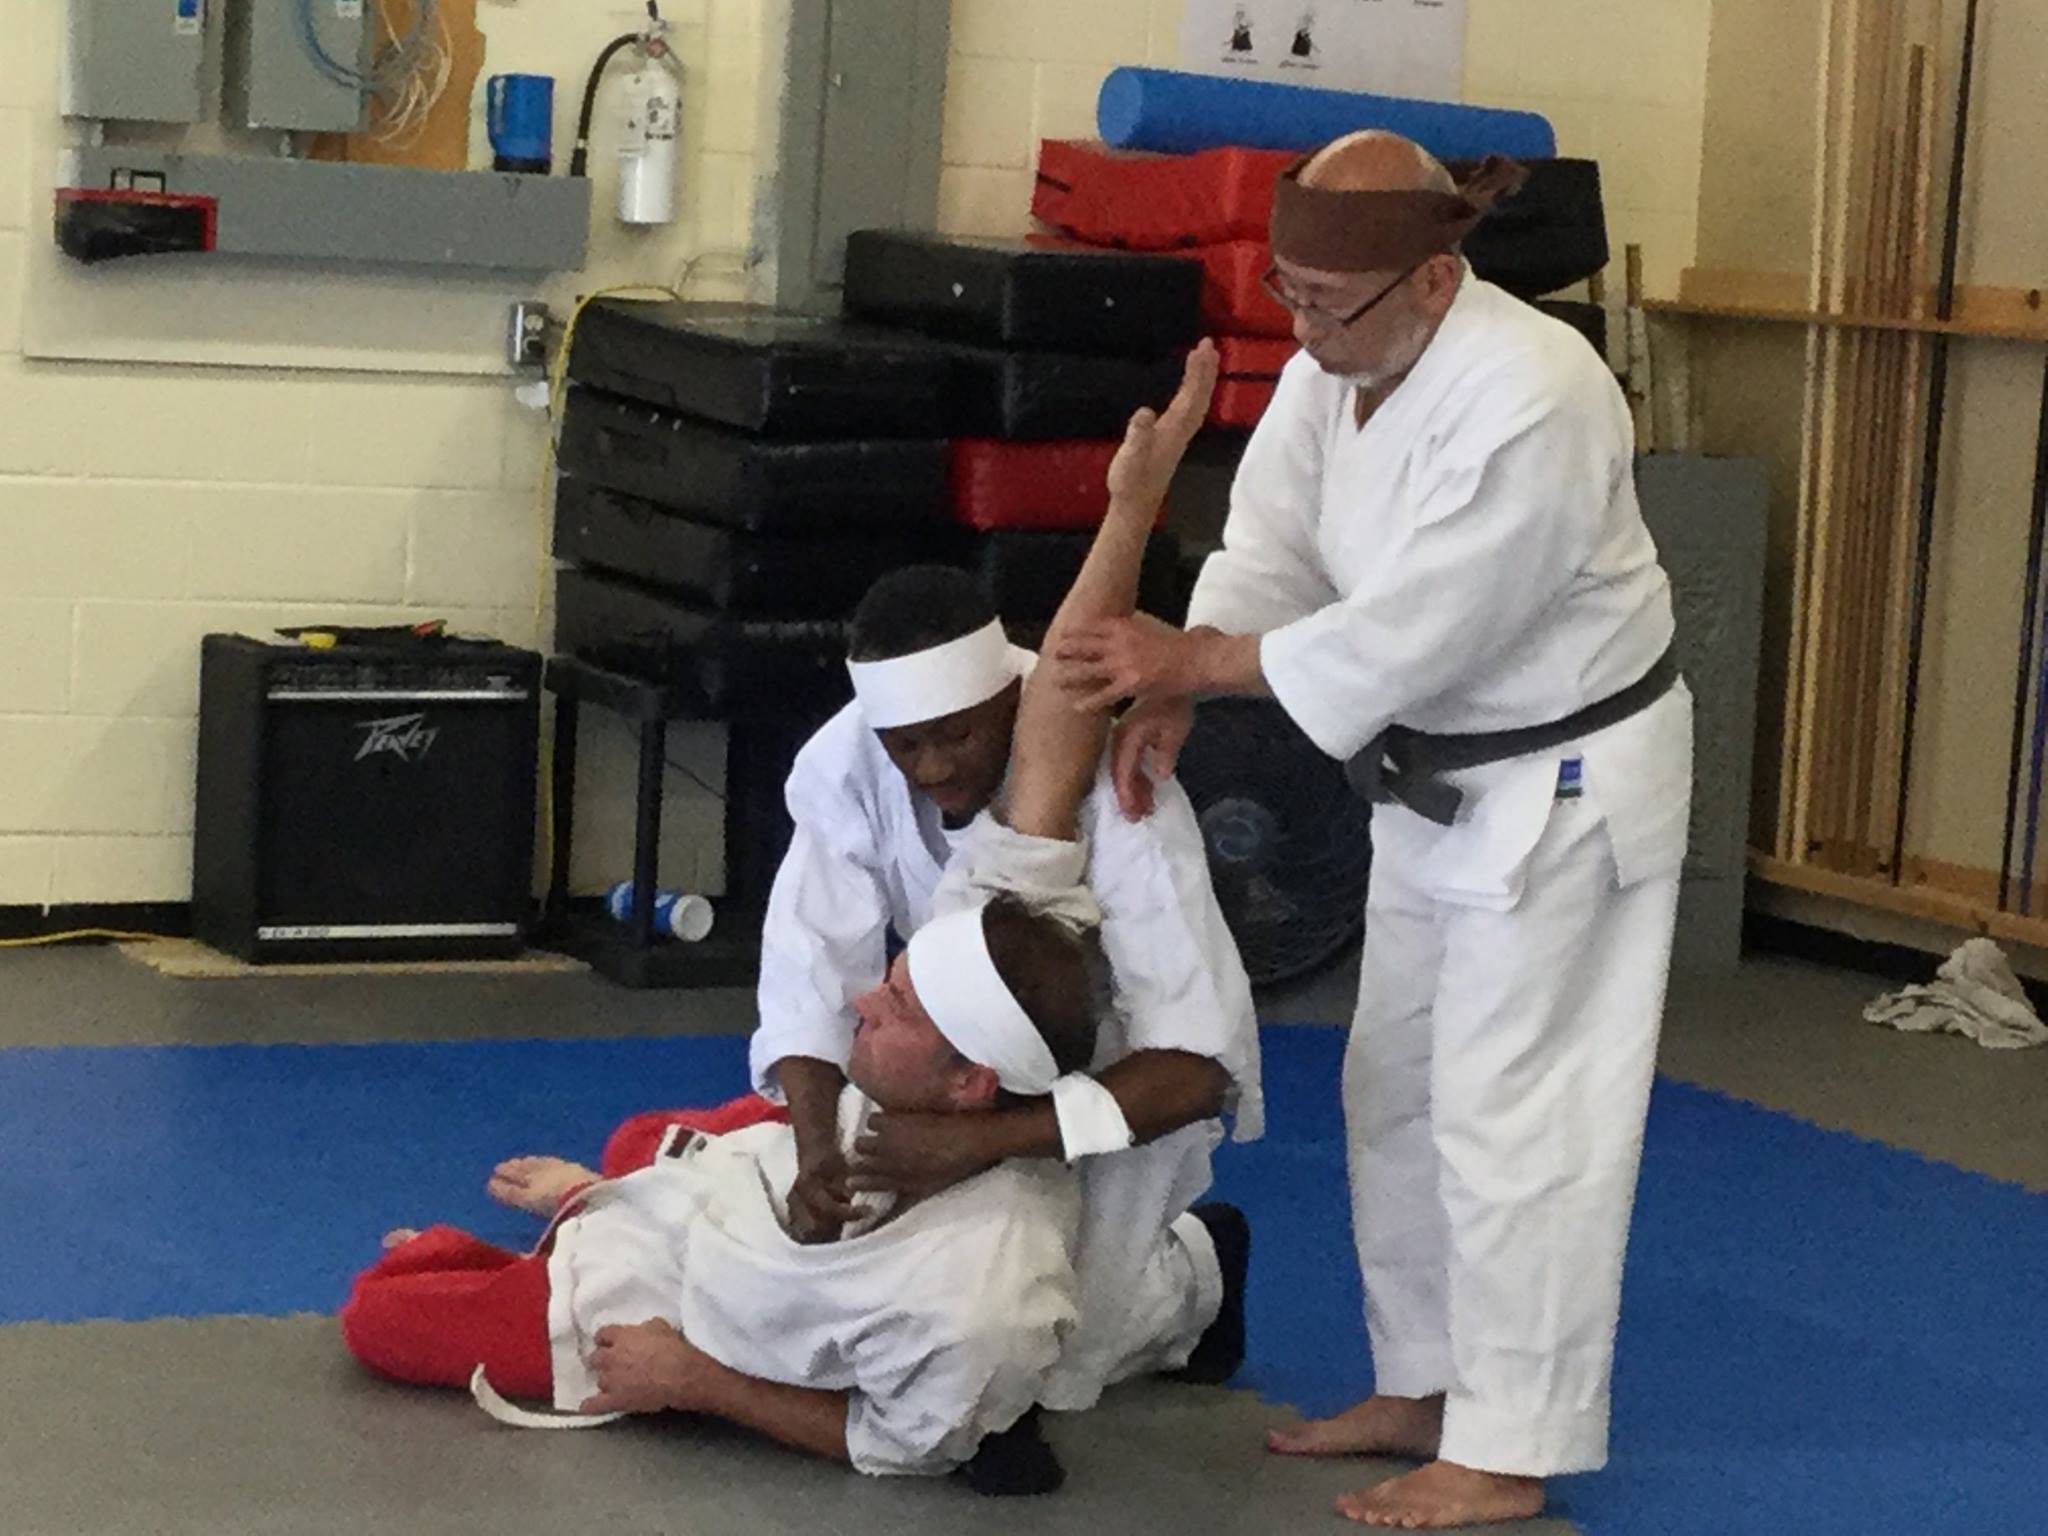 Sensei instructs students on how to apply the techniques correctly